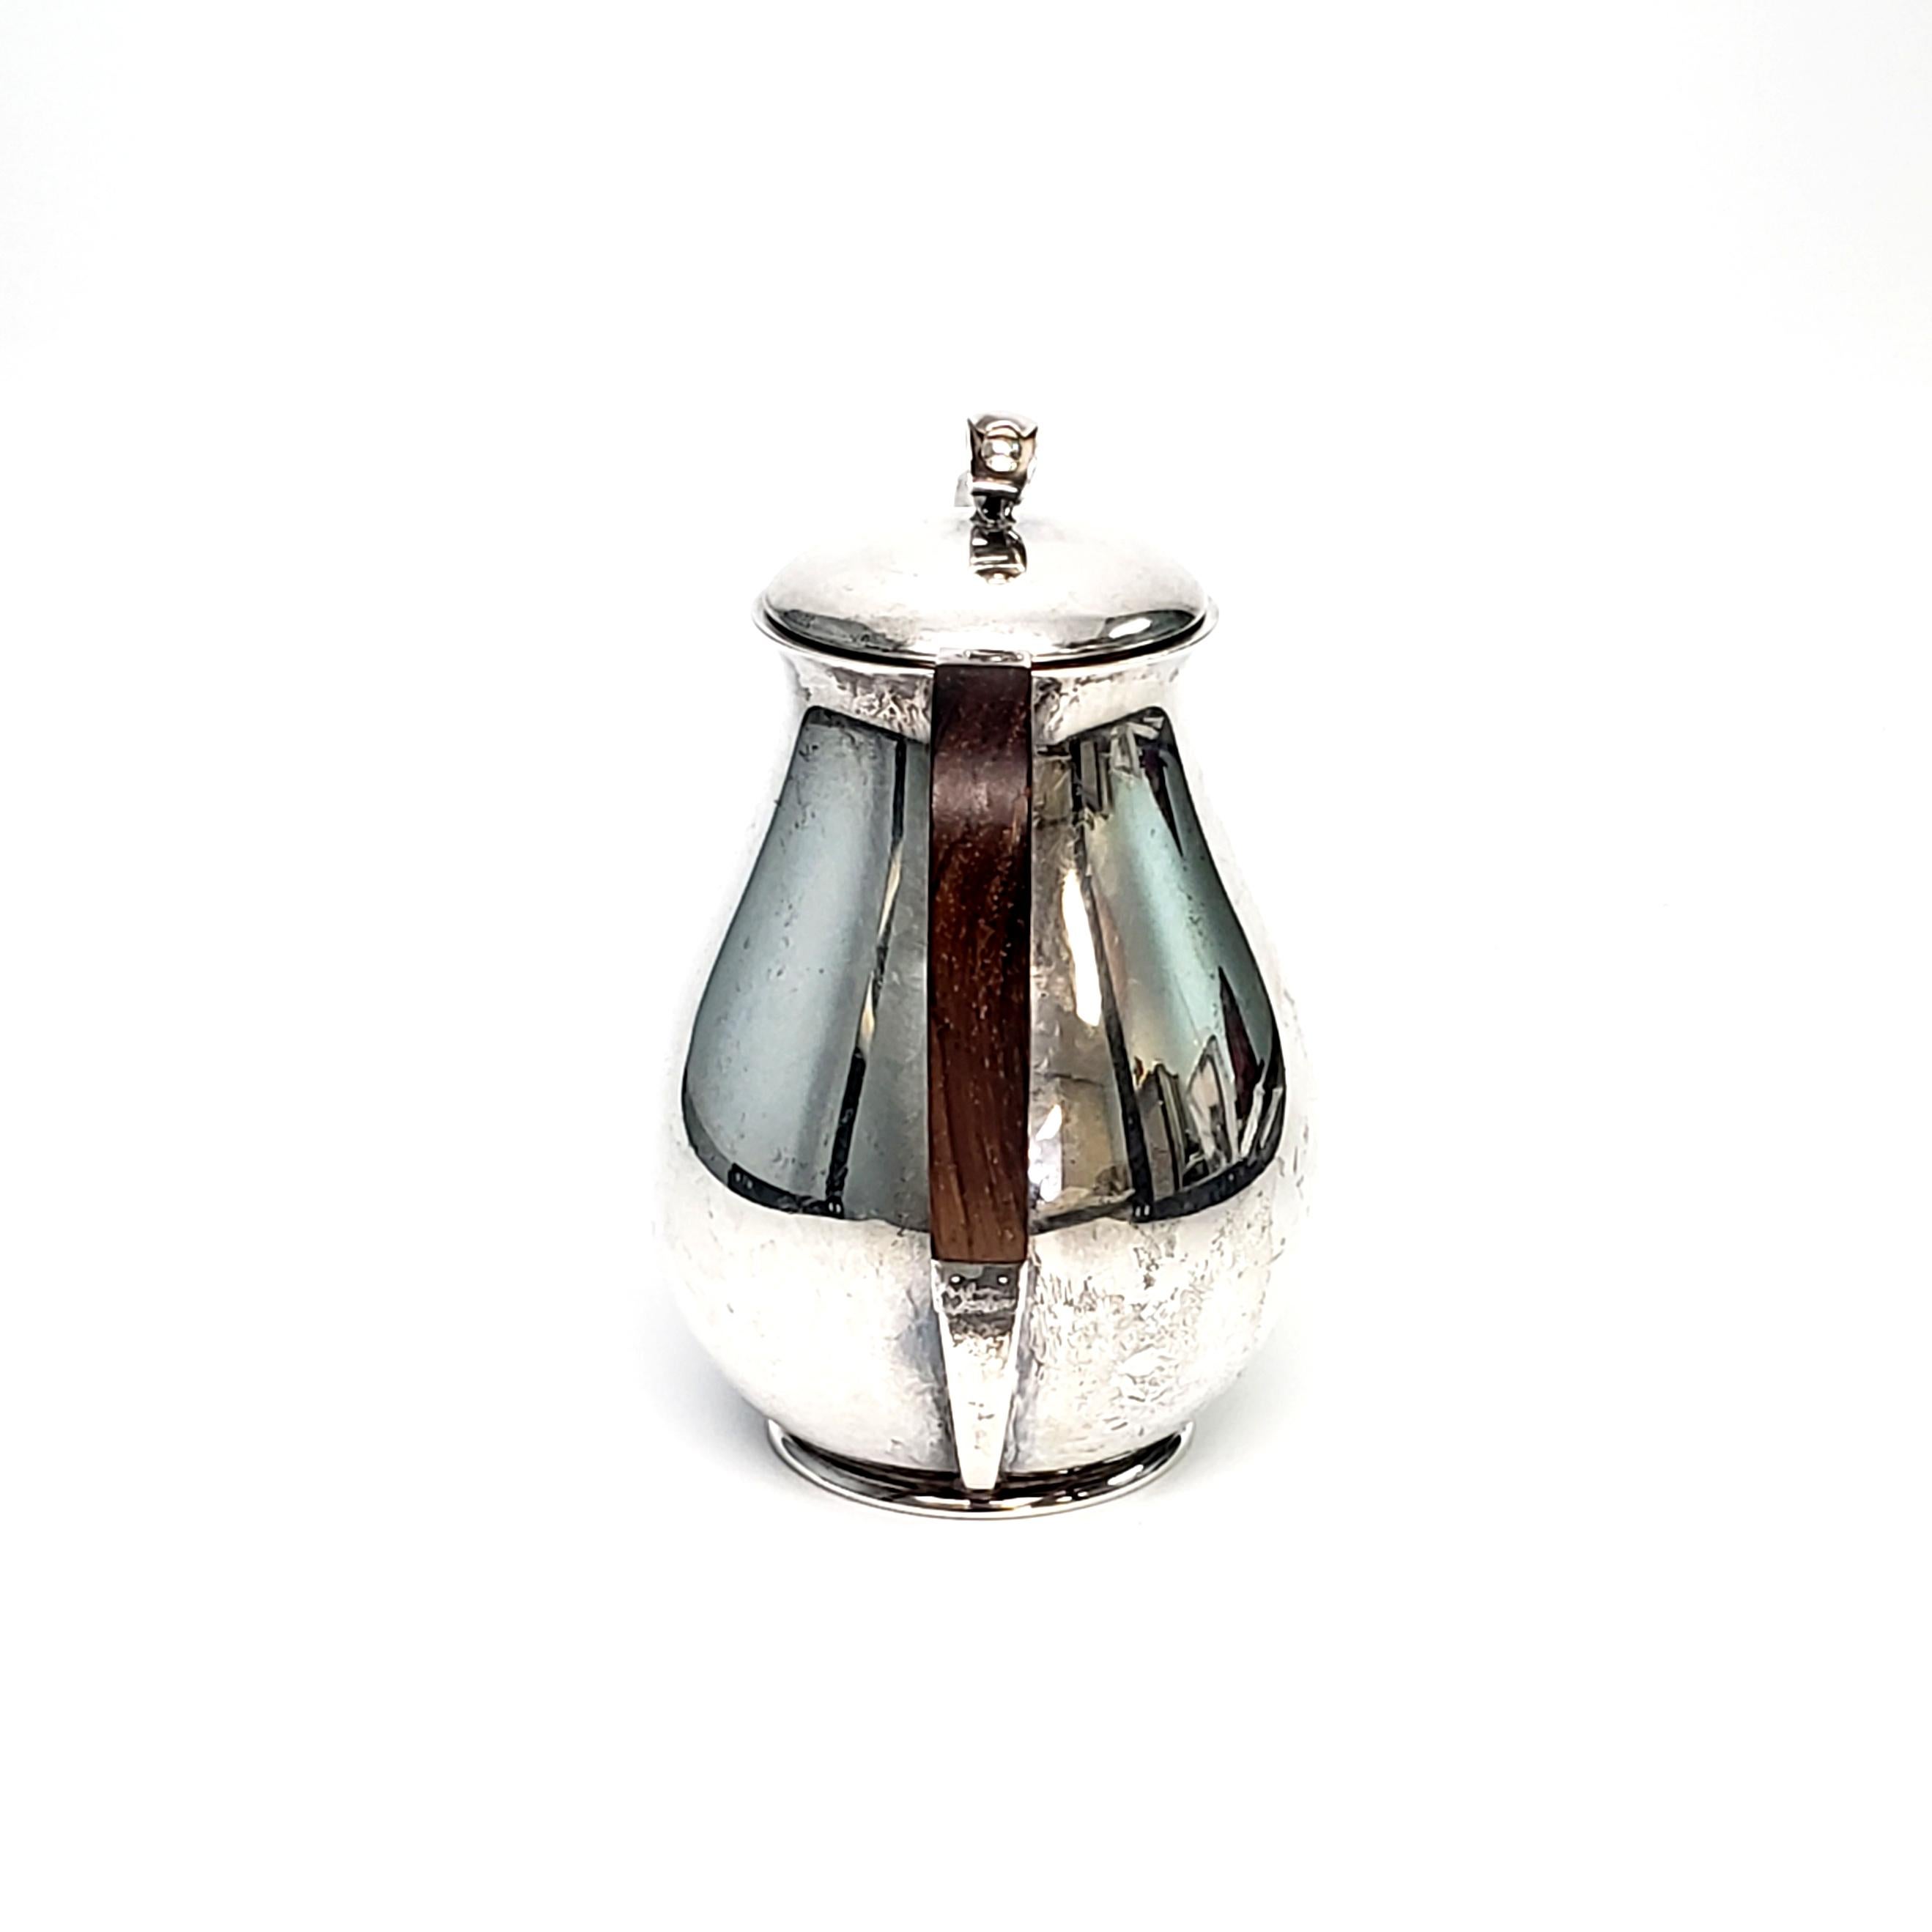 Sterling silver coffee pot by Holger Rasmussen of Copenhagen, Denmark 1945-1956.

Simple, clean lined modernist design makes this a timeless piece reminiscent of Georg Jensen's style.

Measures approx 7 1/4